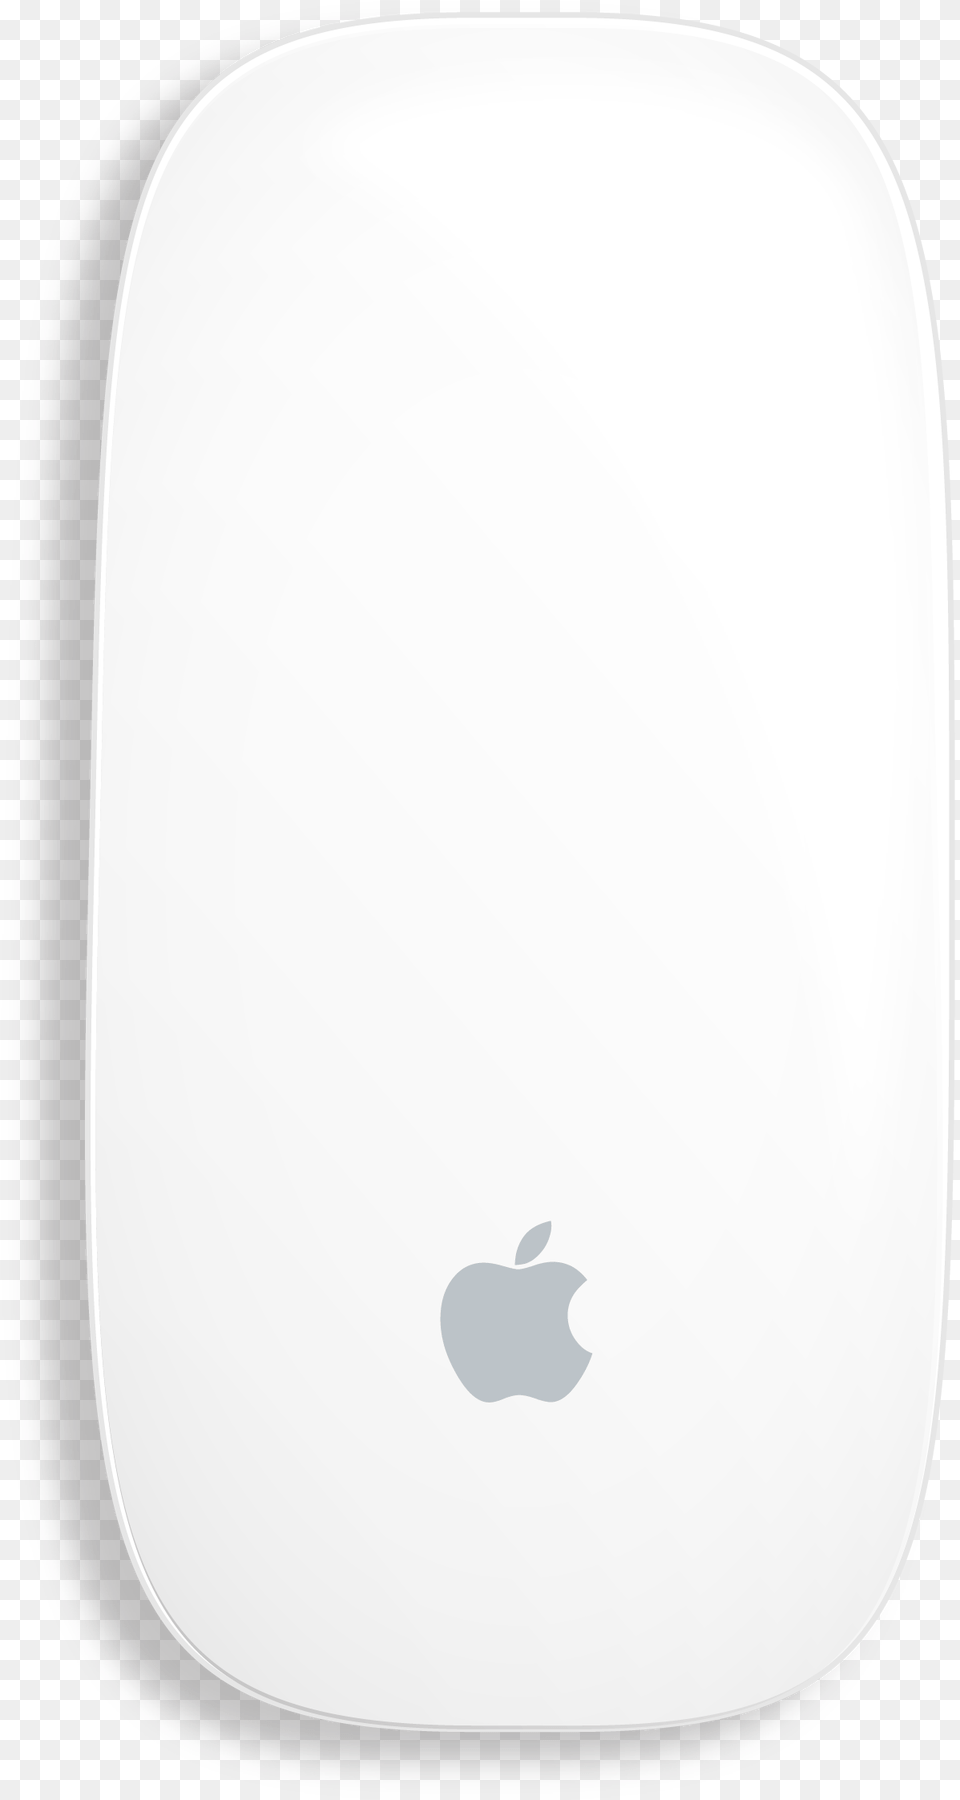 Apple Mouse Graphic Freeuse Files Granny Smith, Computer Hardware, Electronics, Hardware, Mobile Phone Png Image